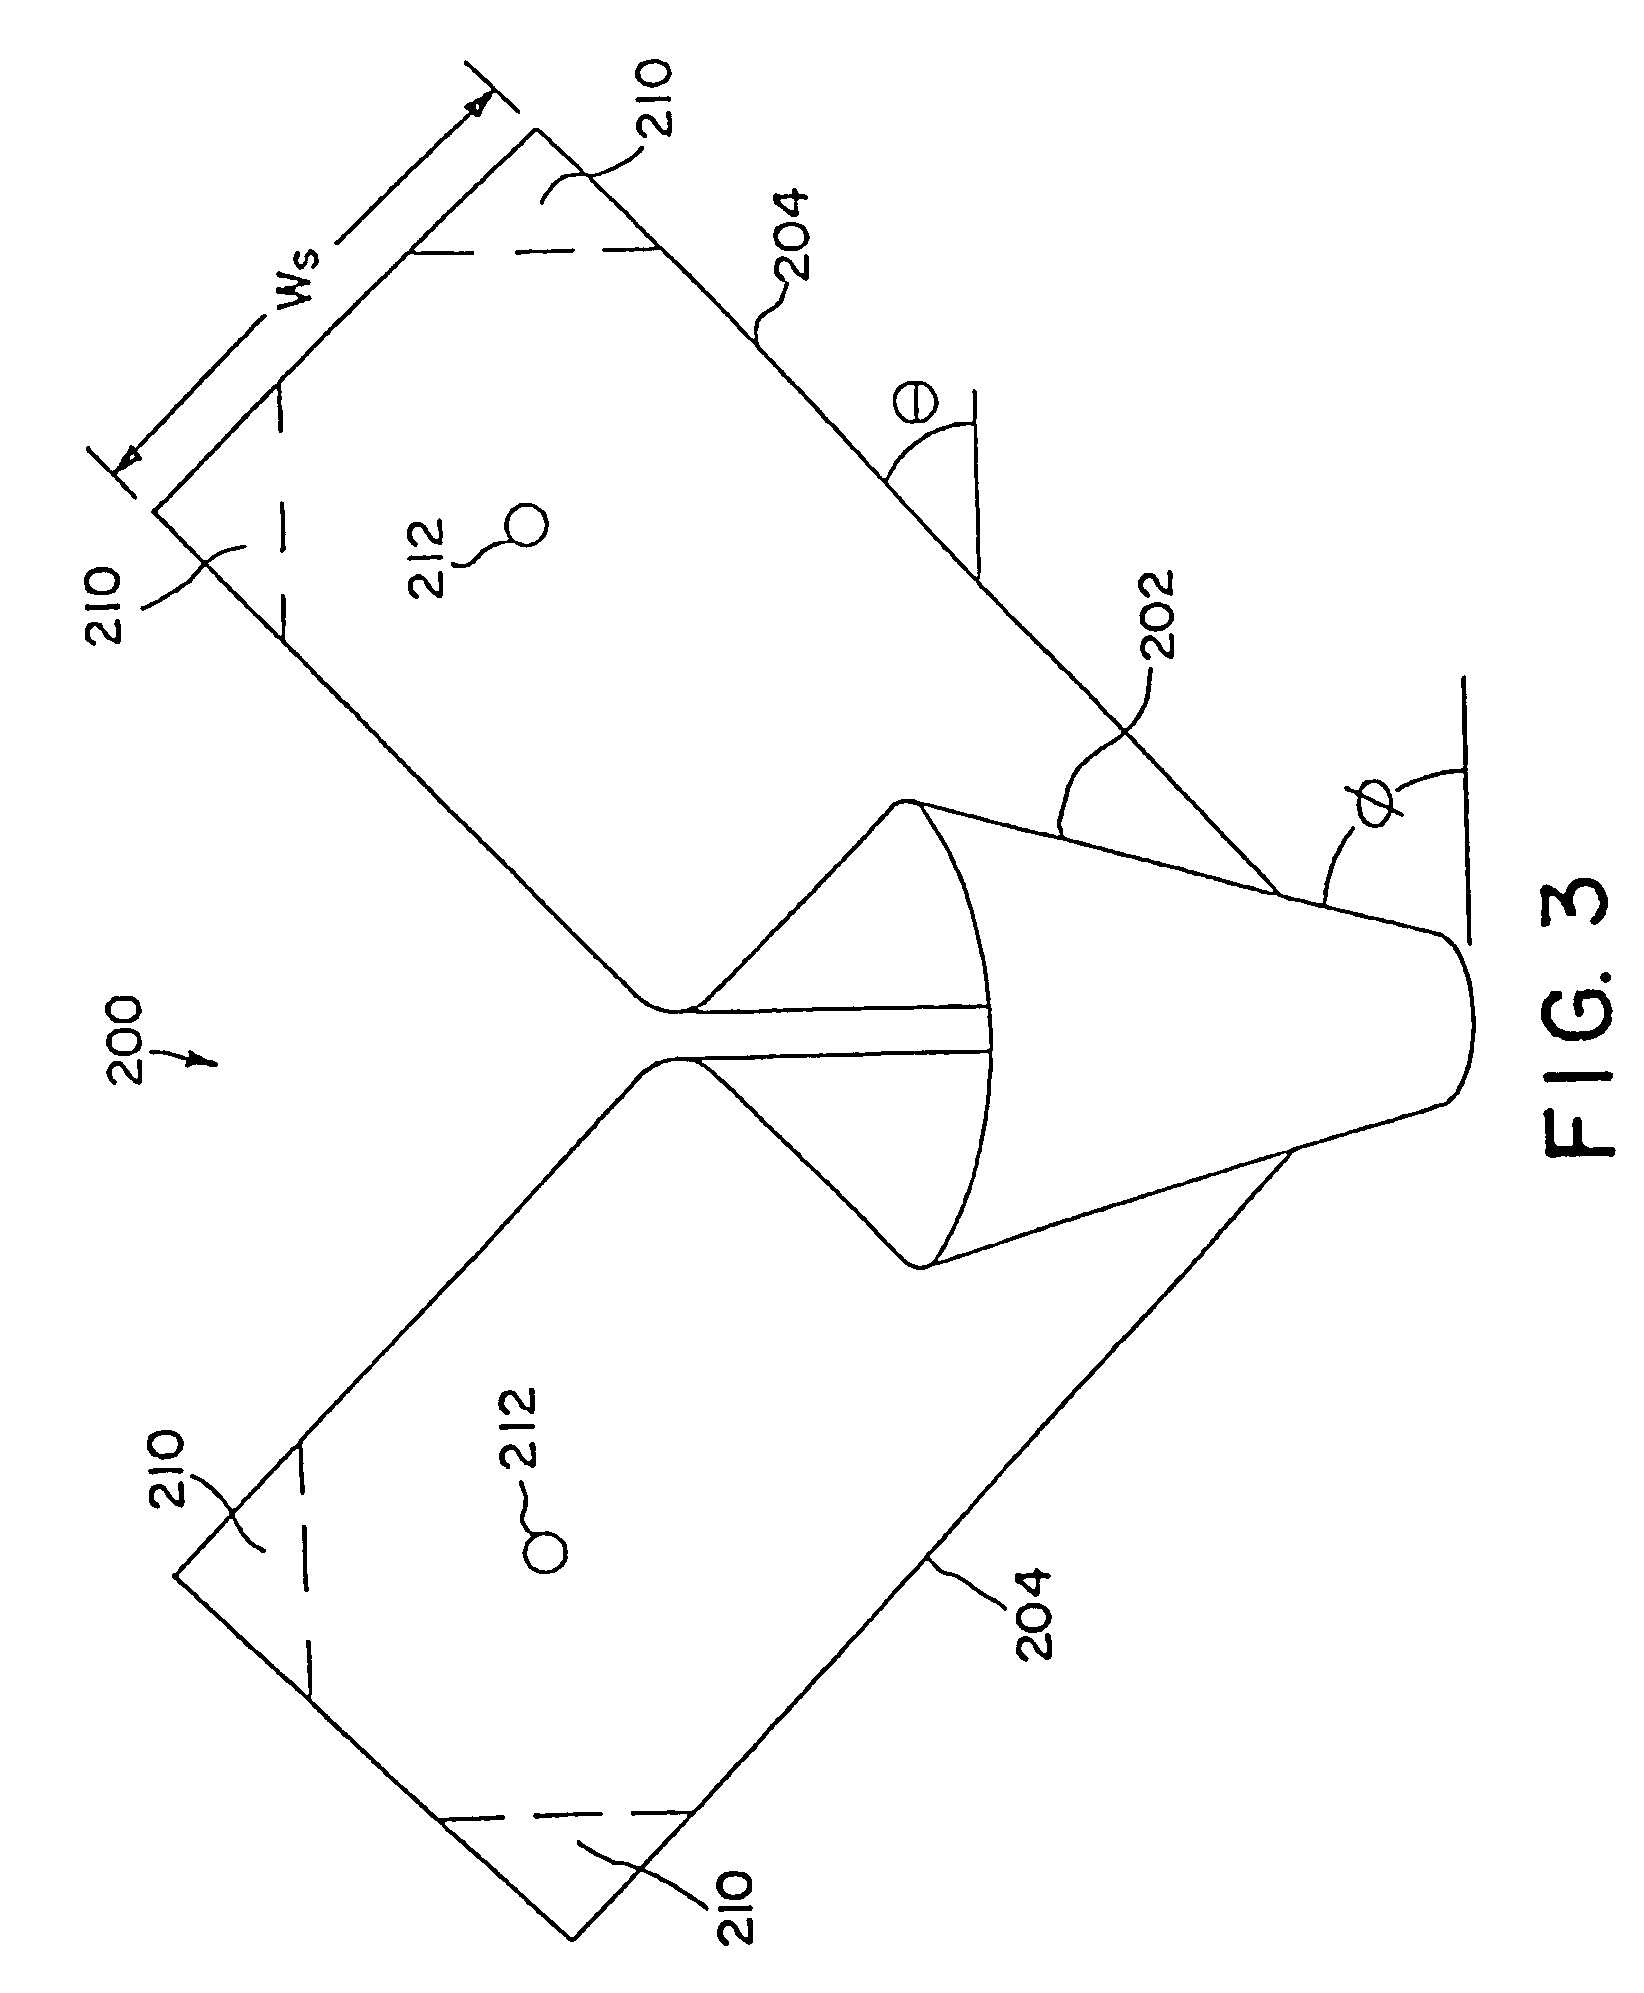 Method and apparatus for coupling structures to roofing